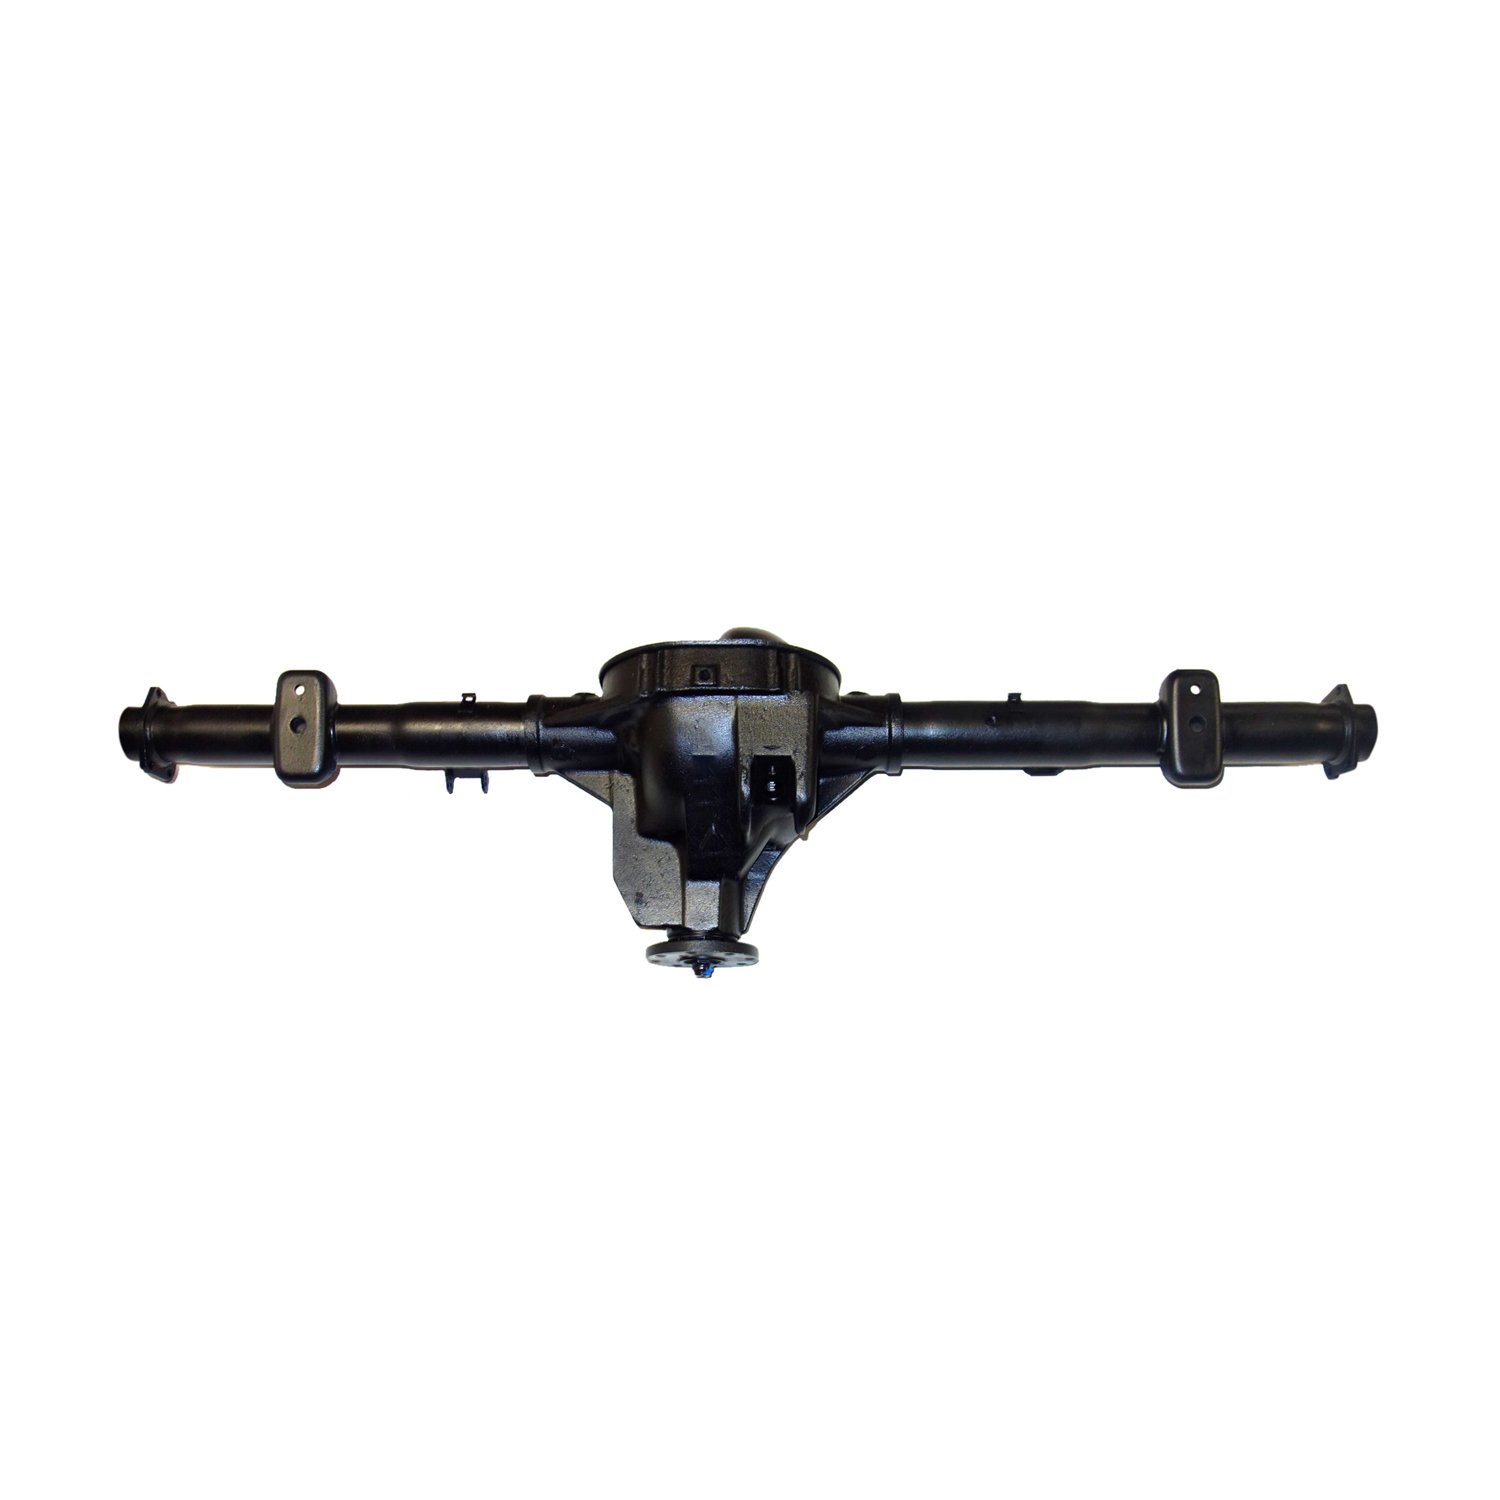 Remanufactured Axle Assy for 8.8" 95-01 Explorer, Exc Sport Trac, 4.11 , Posi LSD